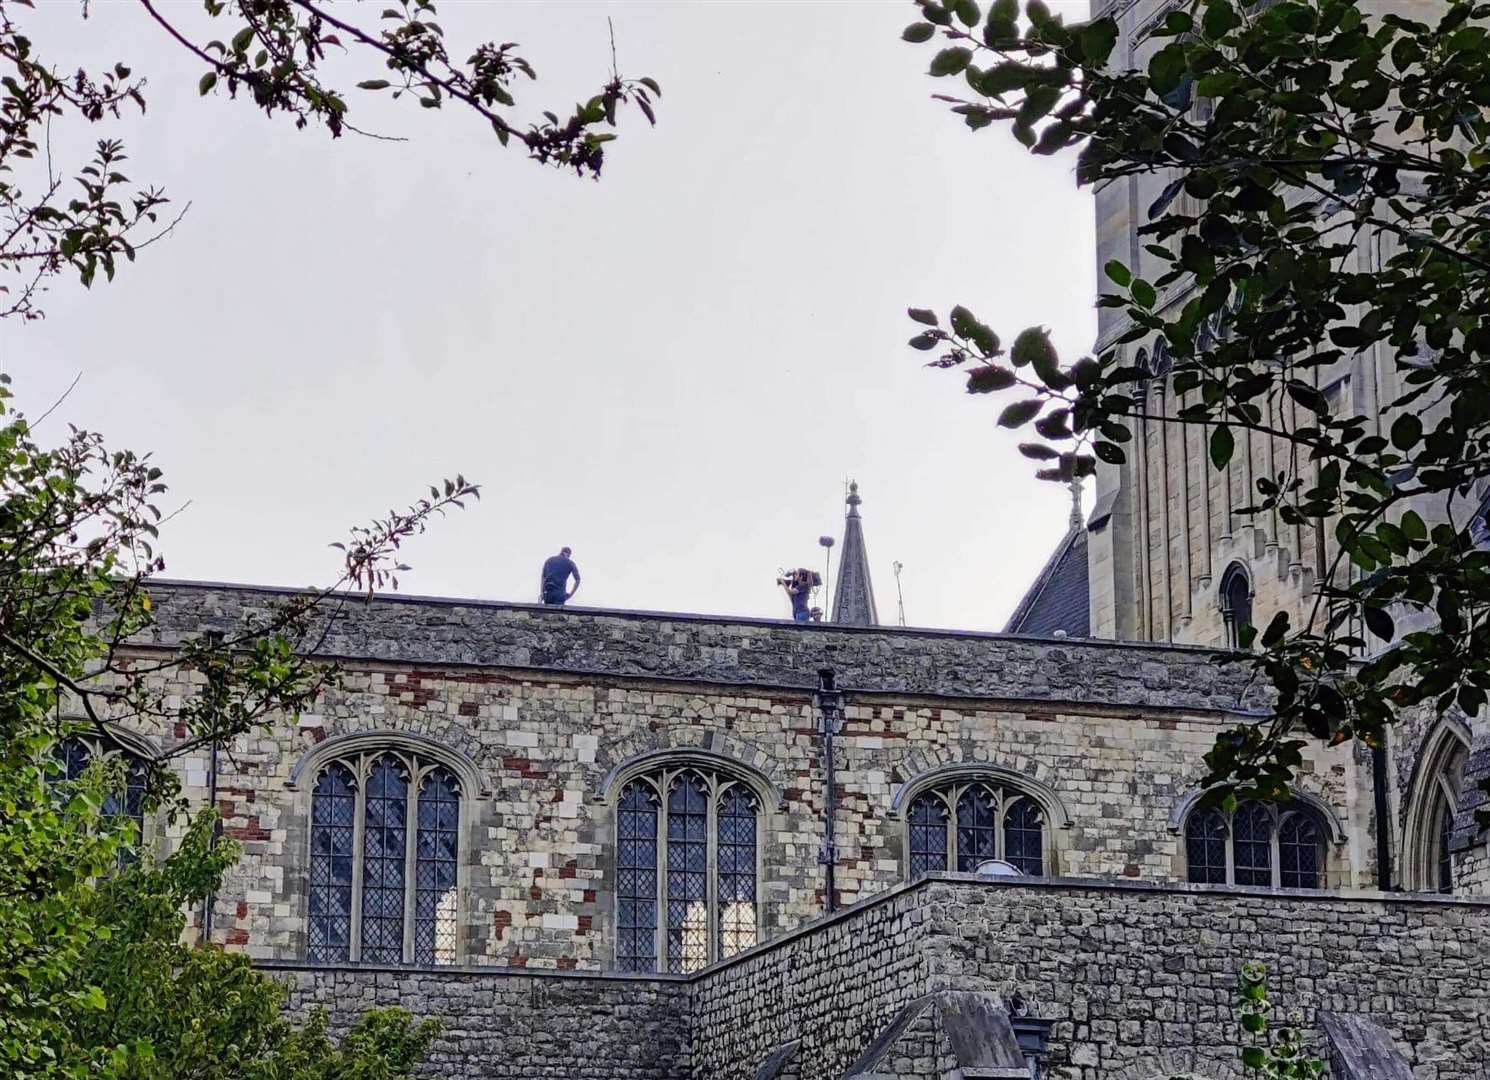 Scientists were spotted on the roof of Rochester Cathedral